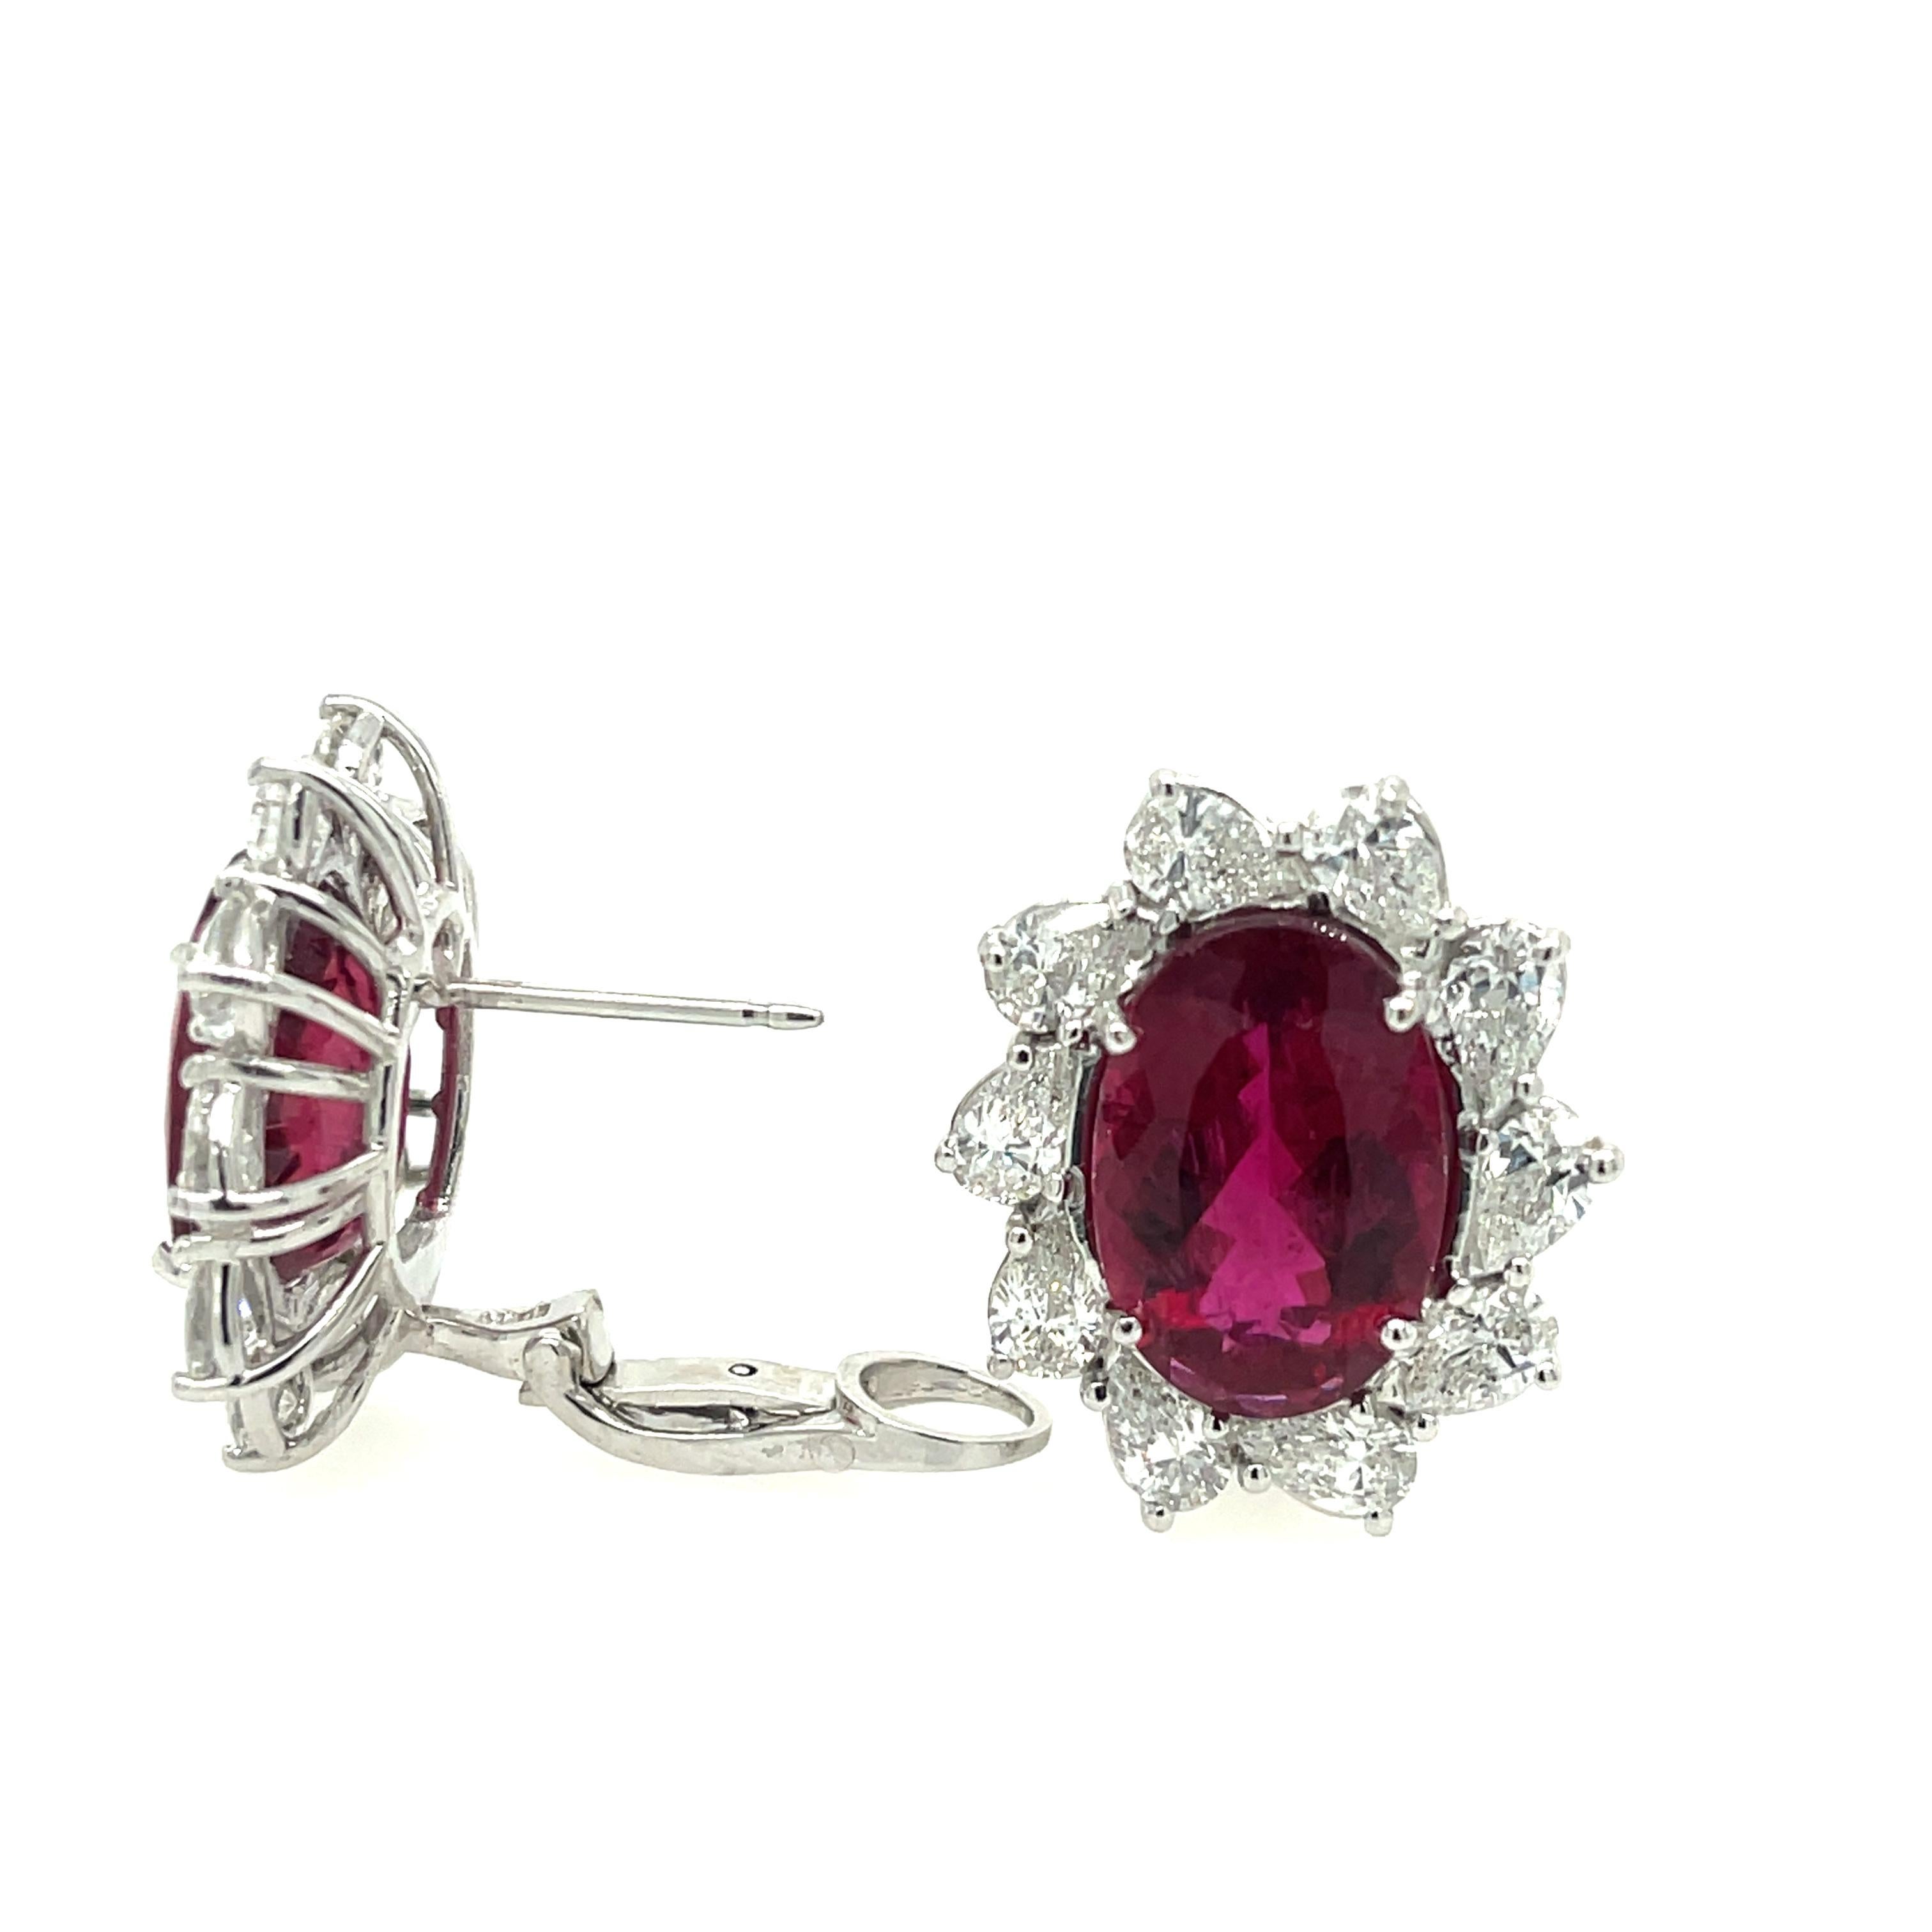 Oval Cut Rubellite '12.17ctw' and Diamond '3.83ctw' Earrings in 18k White Gold